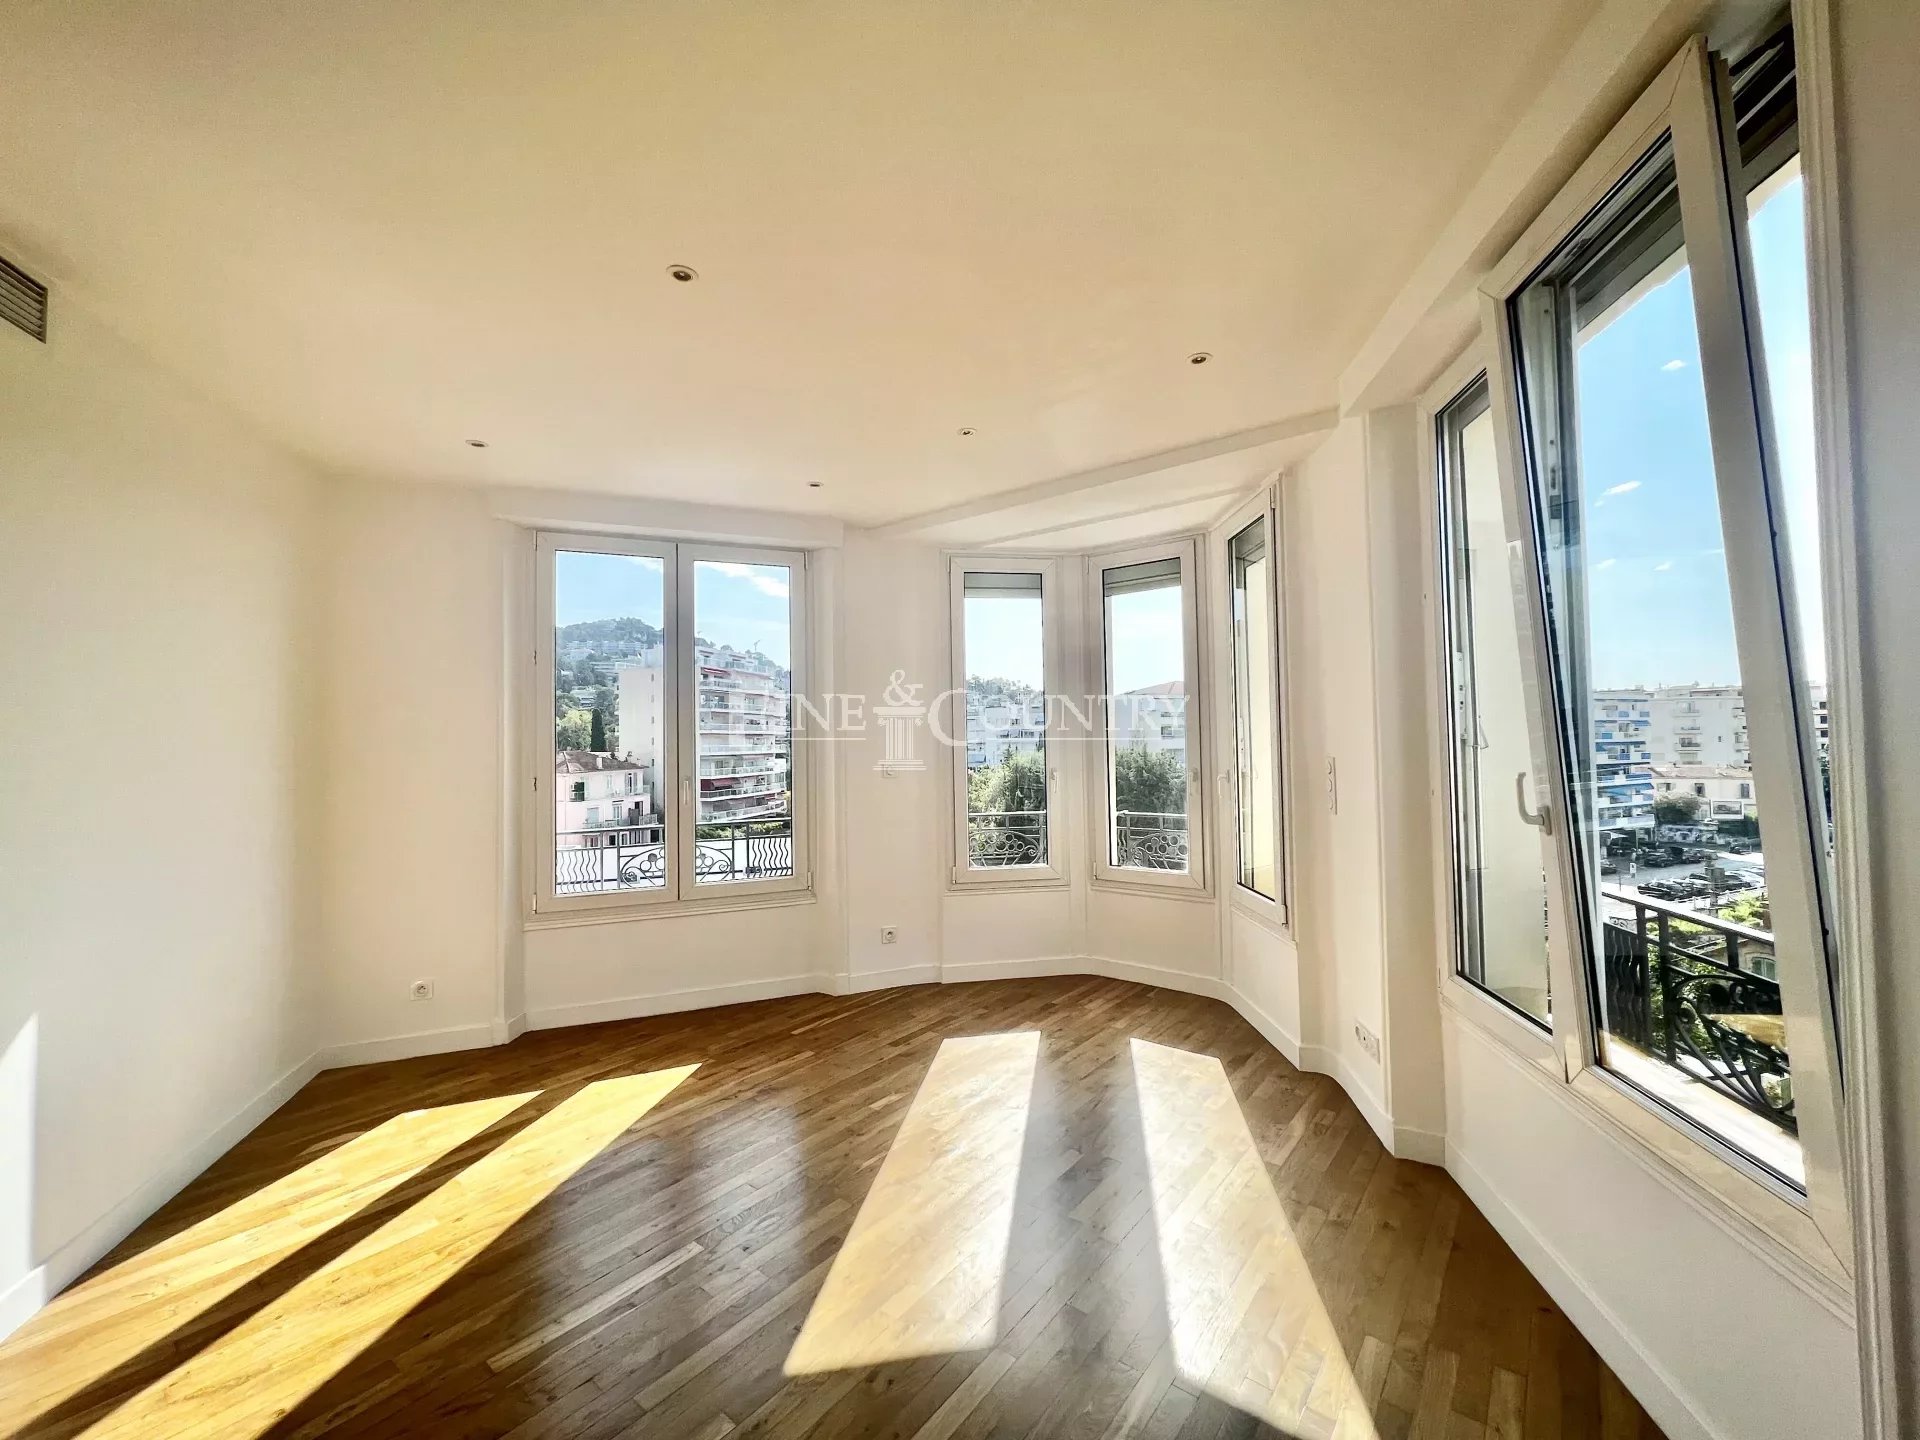 Vente Appartement Bourgeois Cannes Banane